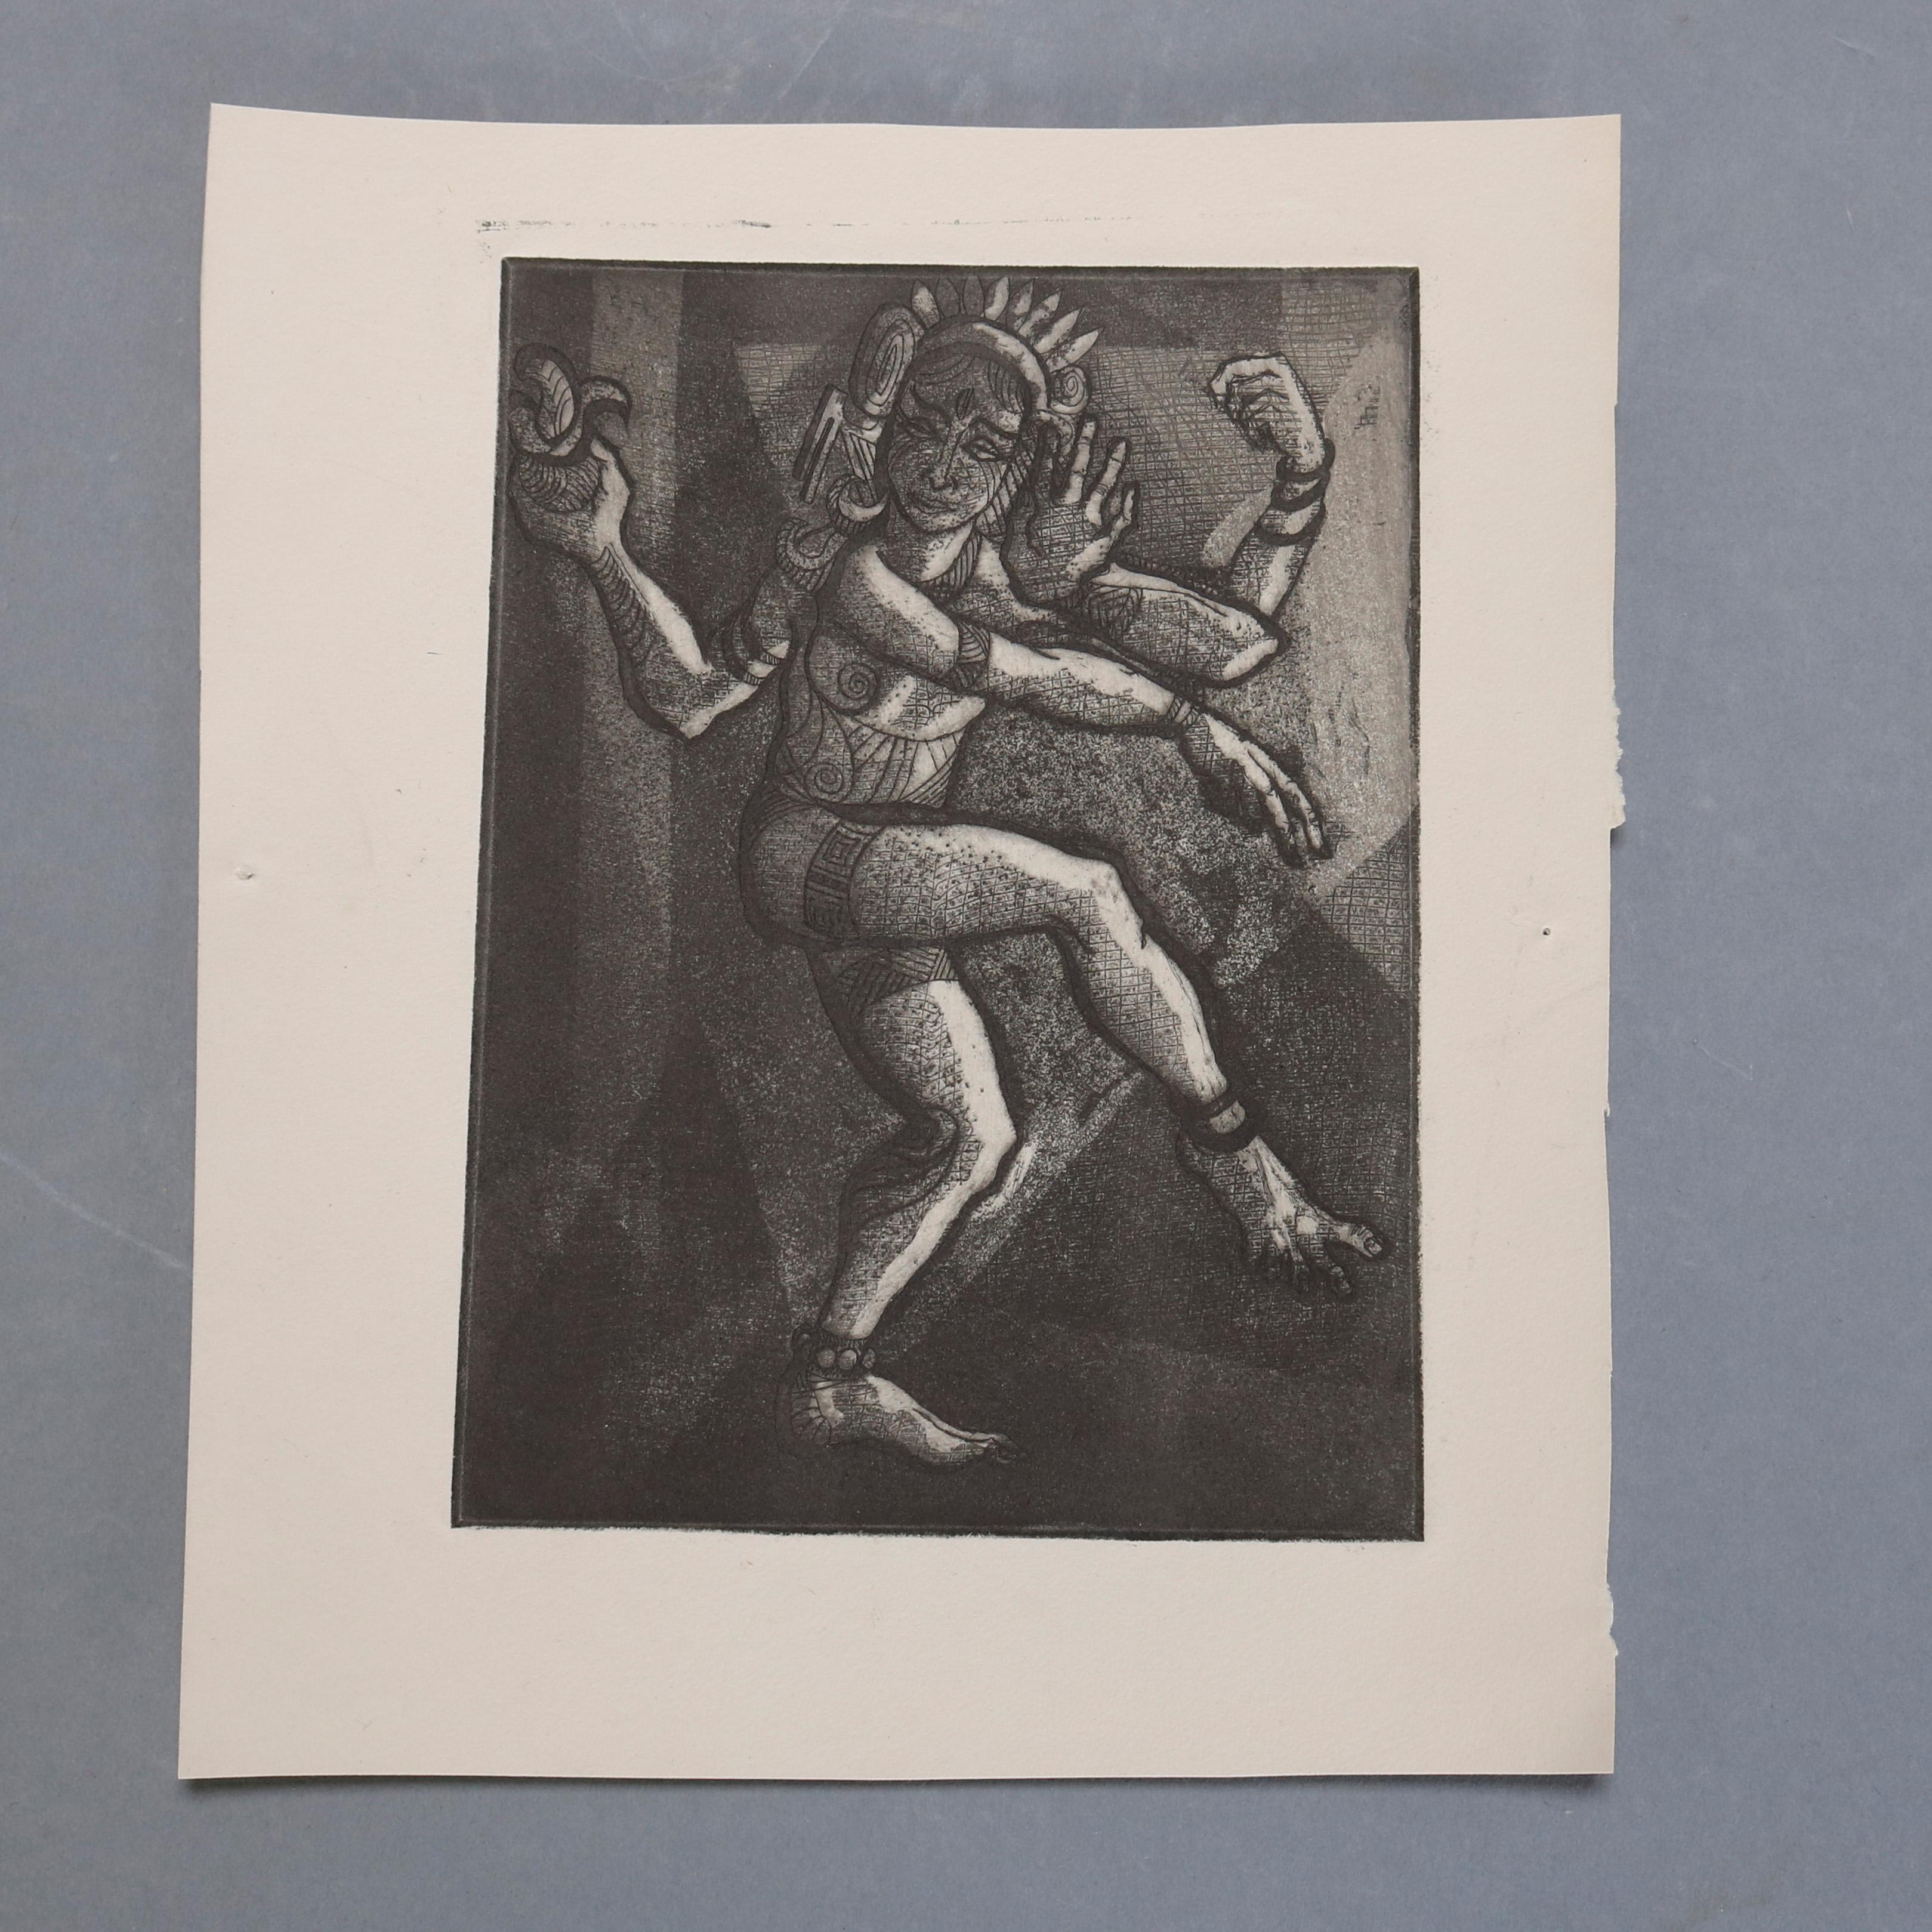 A collection of 4 James Joseph Kearns expressionist lithographs depict figures in various settings, circa 1954

***DELIVERY NOTICE – Due to COVID-19 we are employing NO-CONTACT PRACTICES in the transfer of purchased items.  Additionally, for those